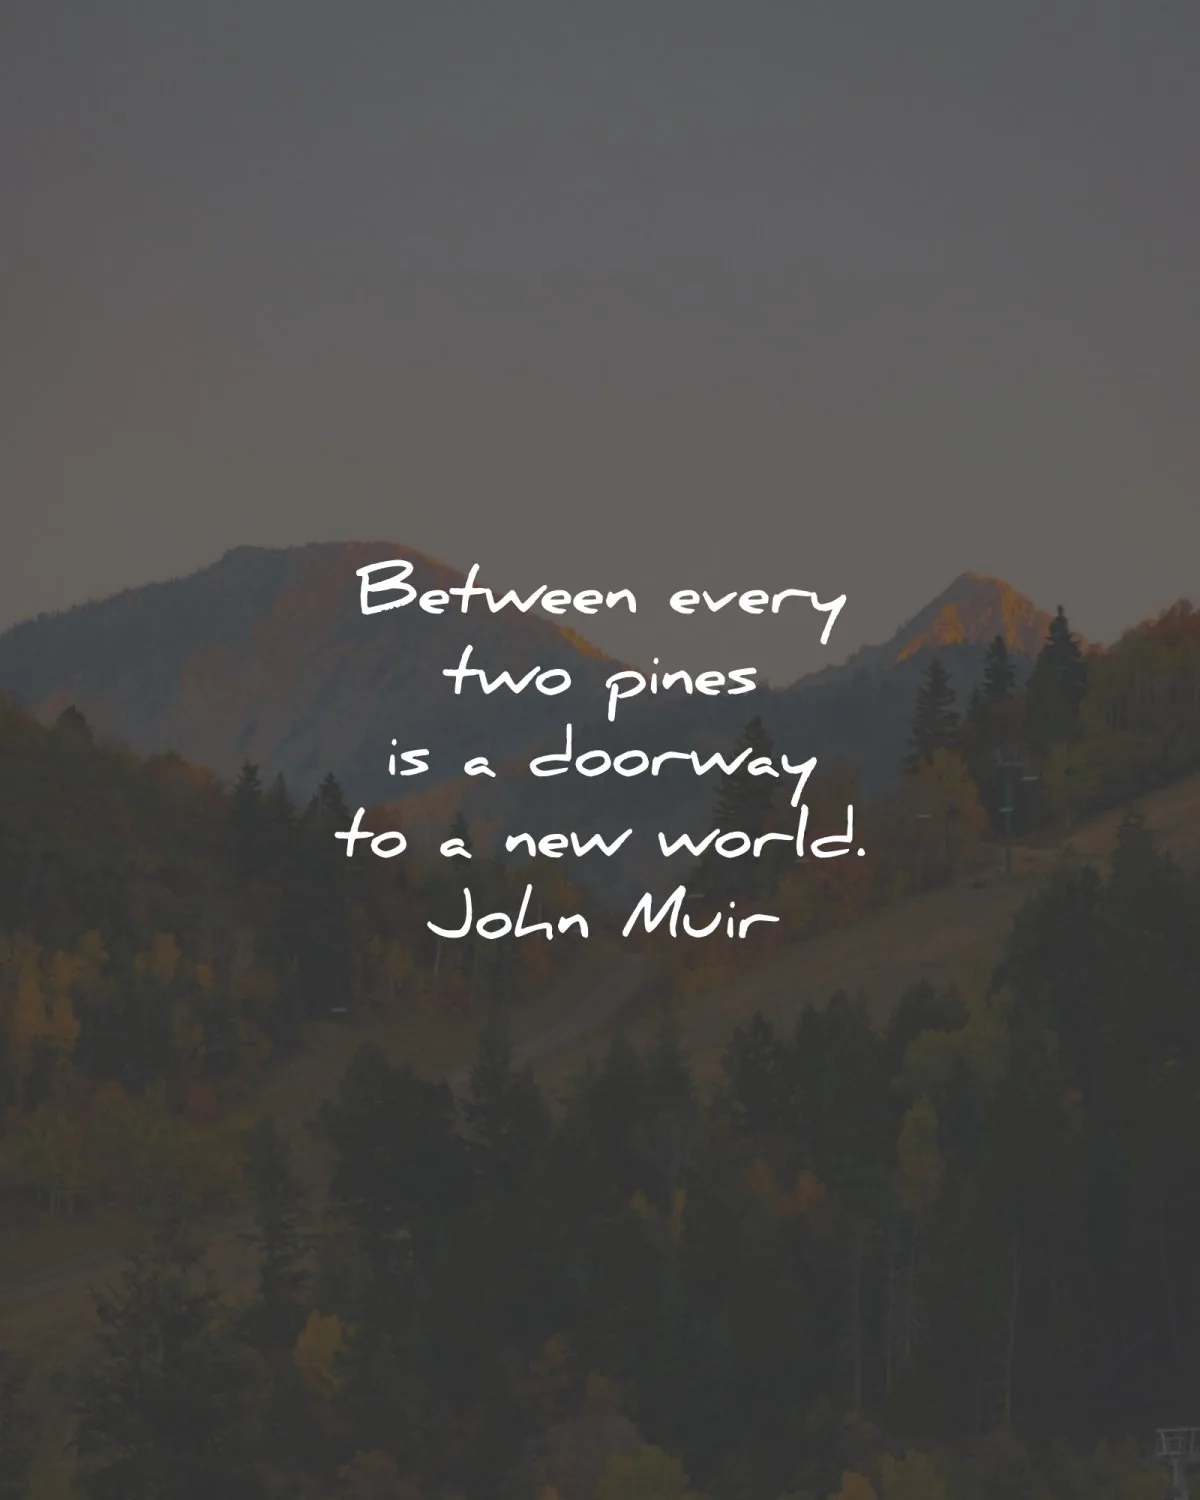 john muir quotes between every two pines wisdom